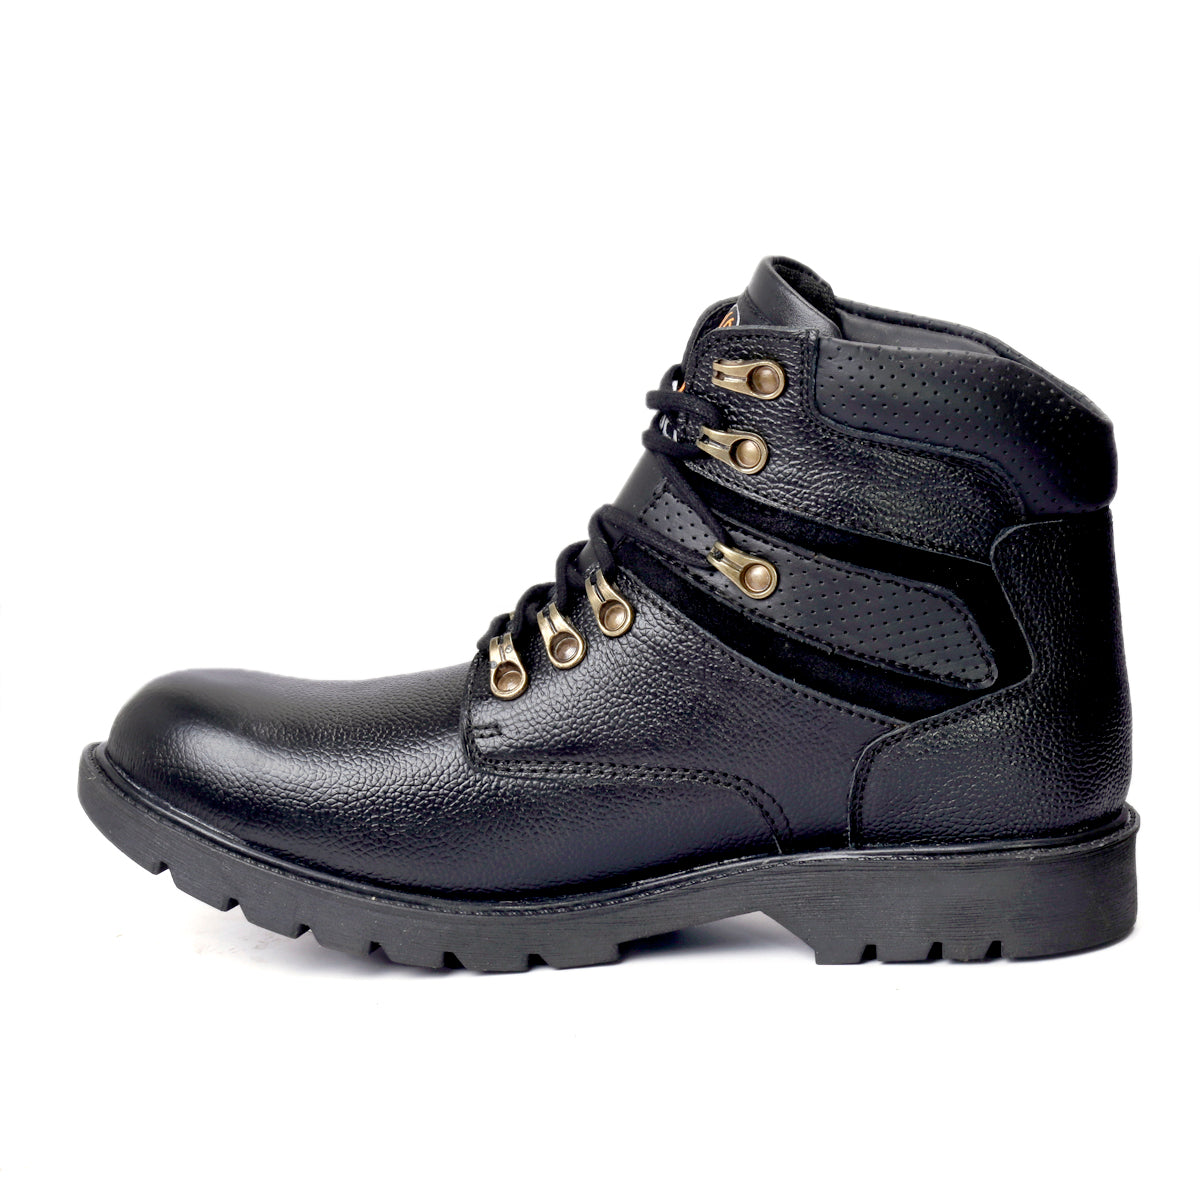 leather boots, leather boots for men, black leather boots, black lace up boots, grain leather outdoor shoes, steel toe cap boots